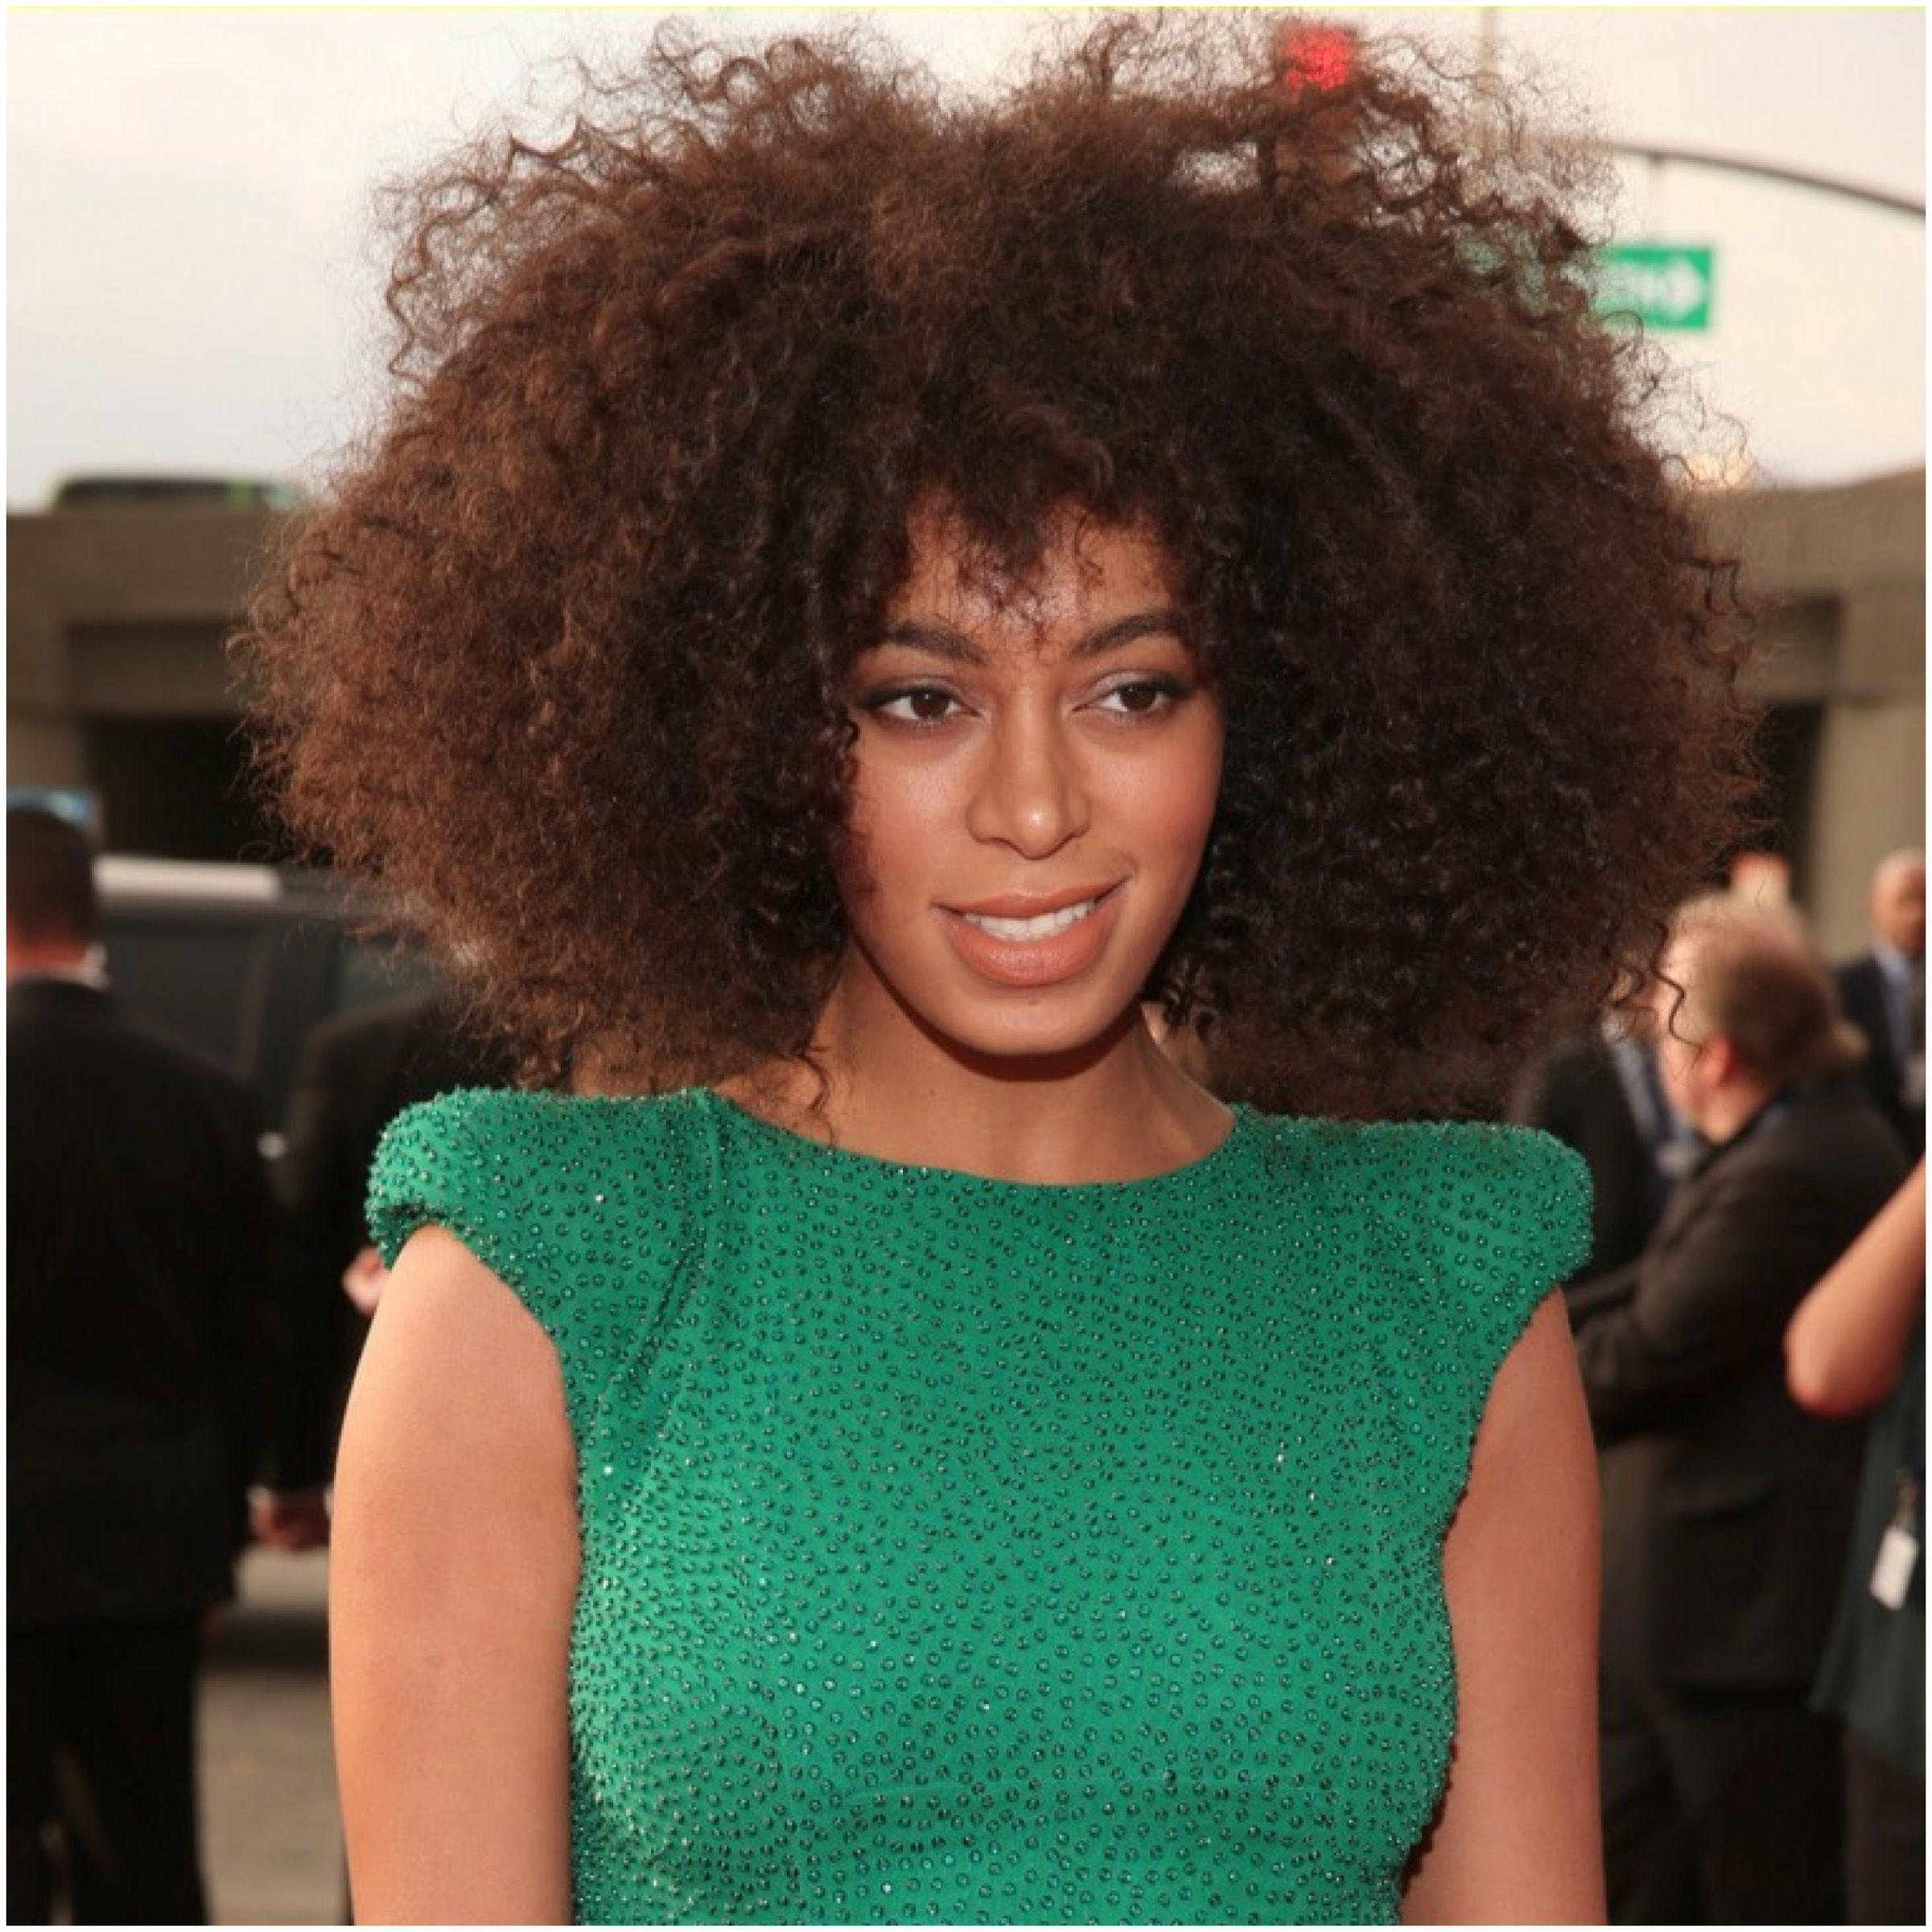 Solange Knowles Wallpapers